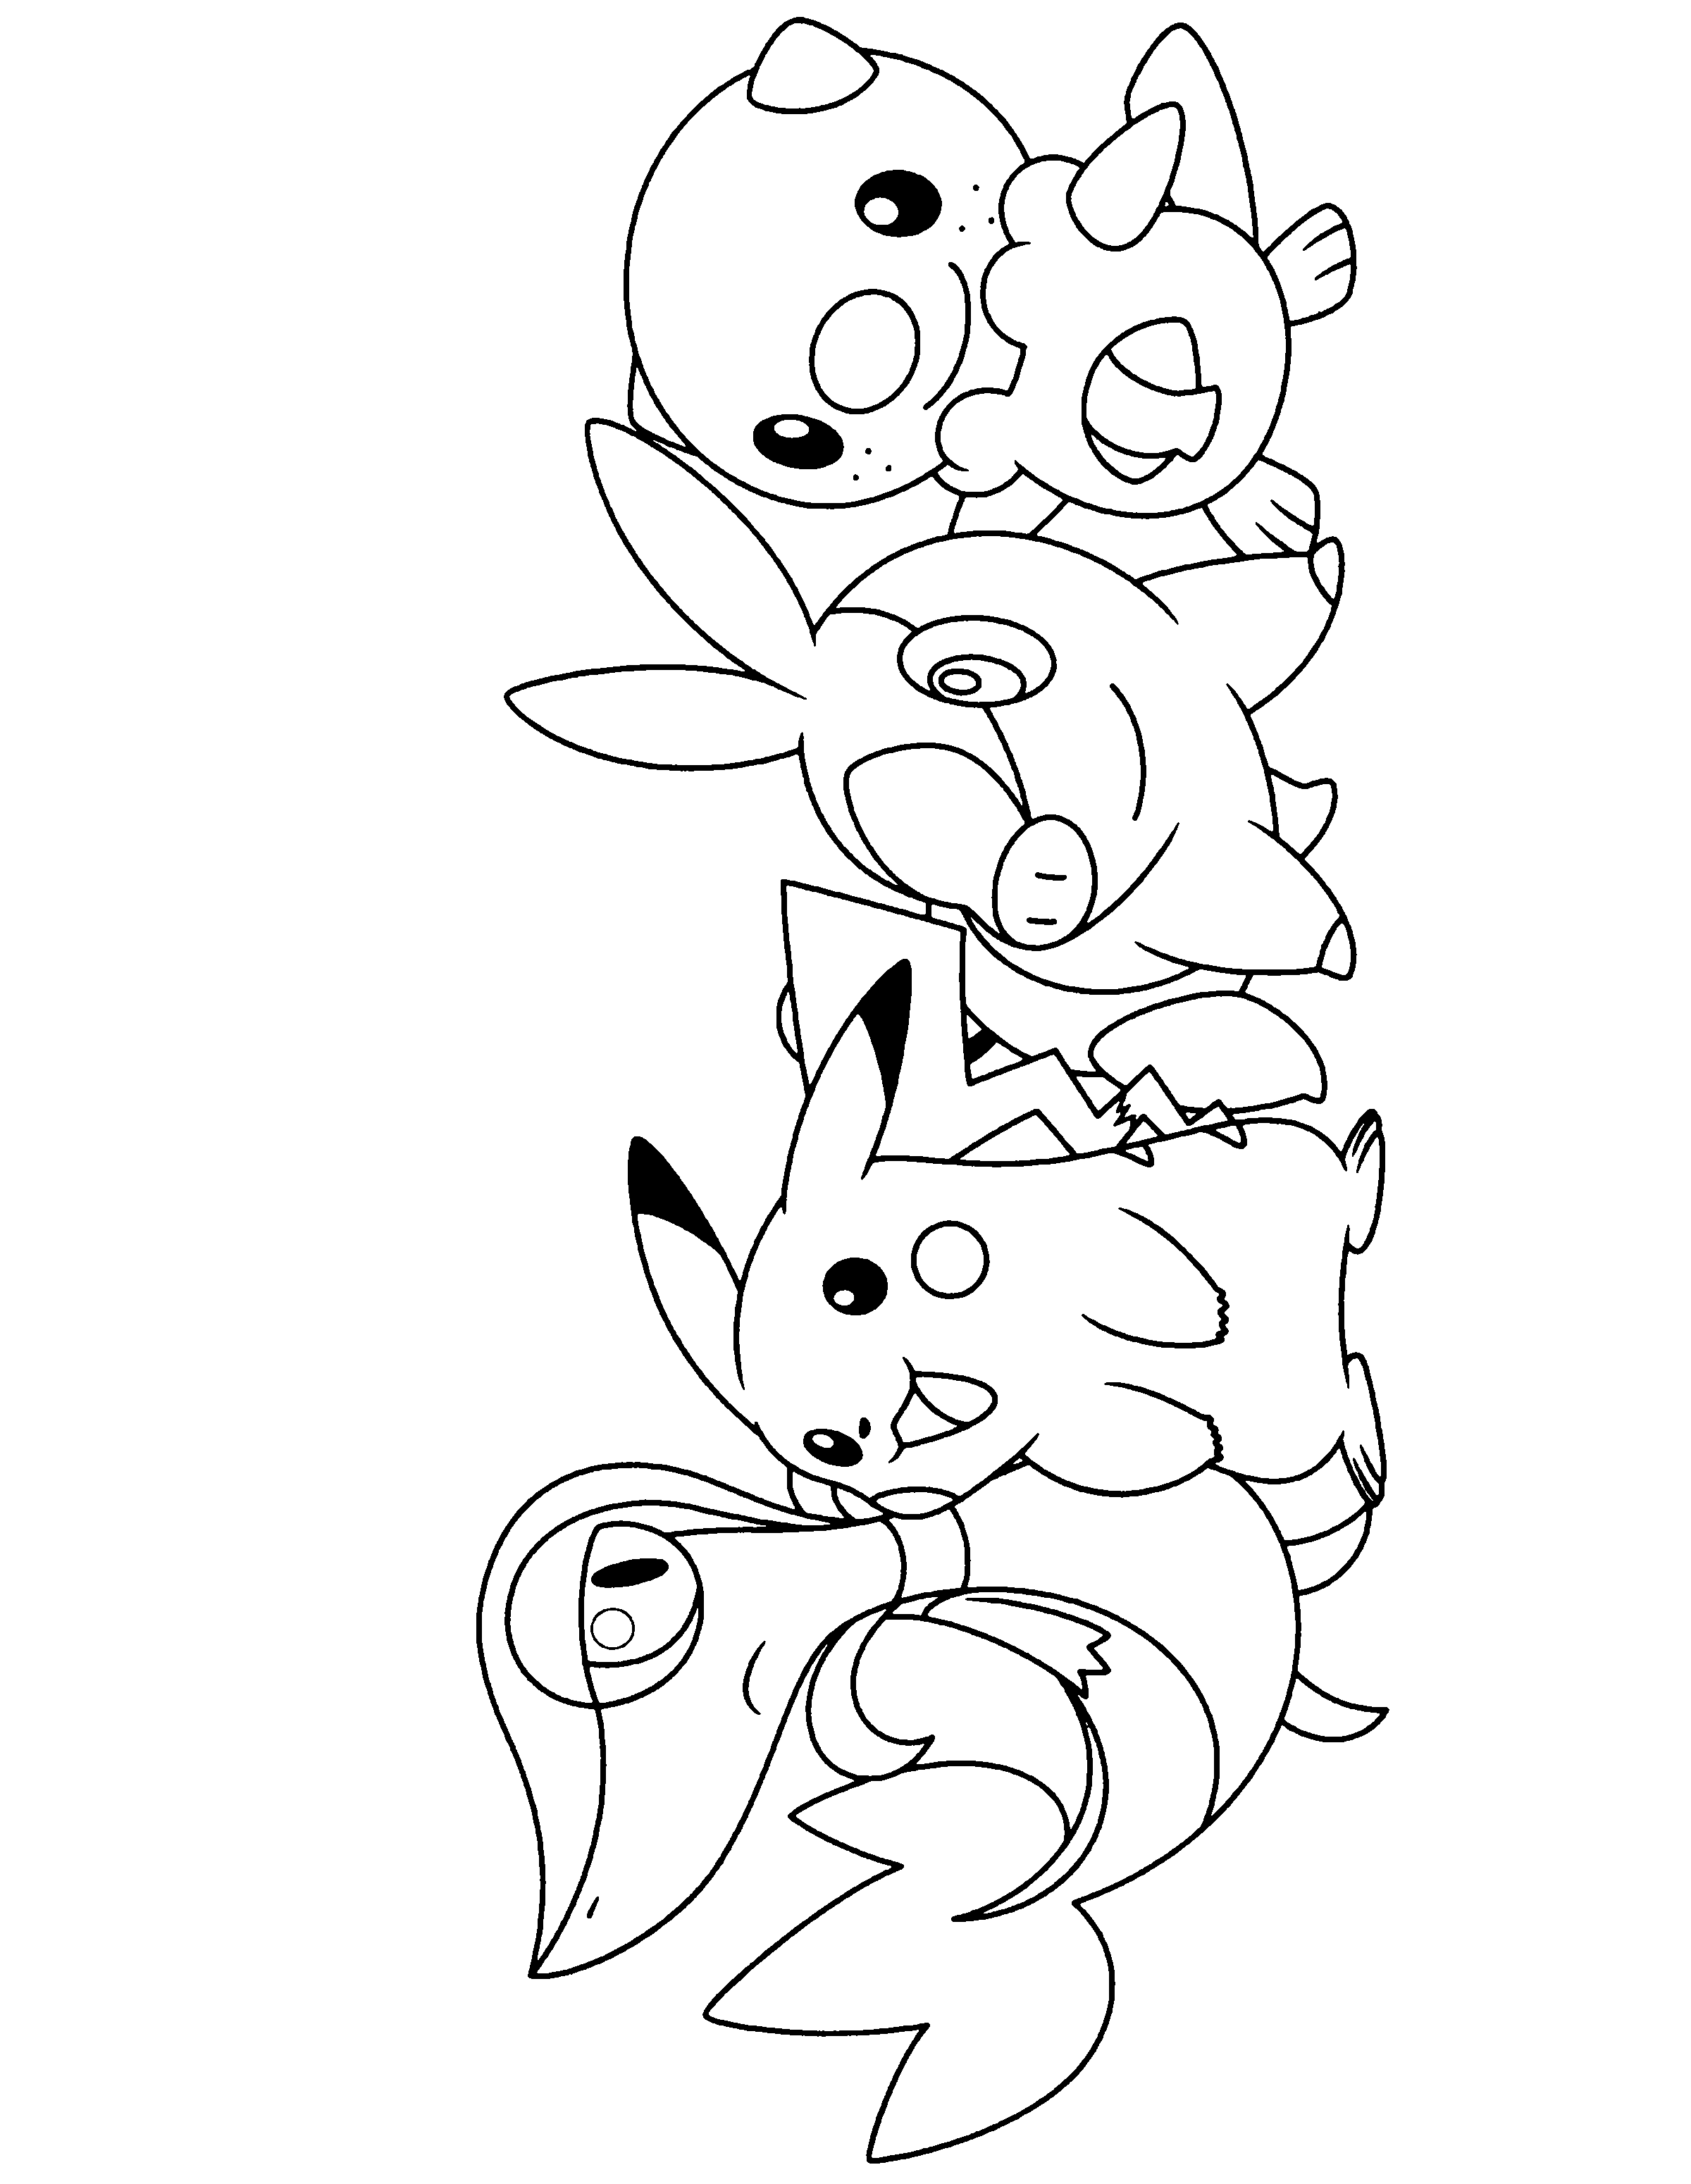 colouring pages of pokemon black and white pokémon black and white coloring pages free gtgt disney of pokemon and white black colouring pages 